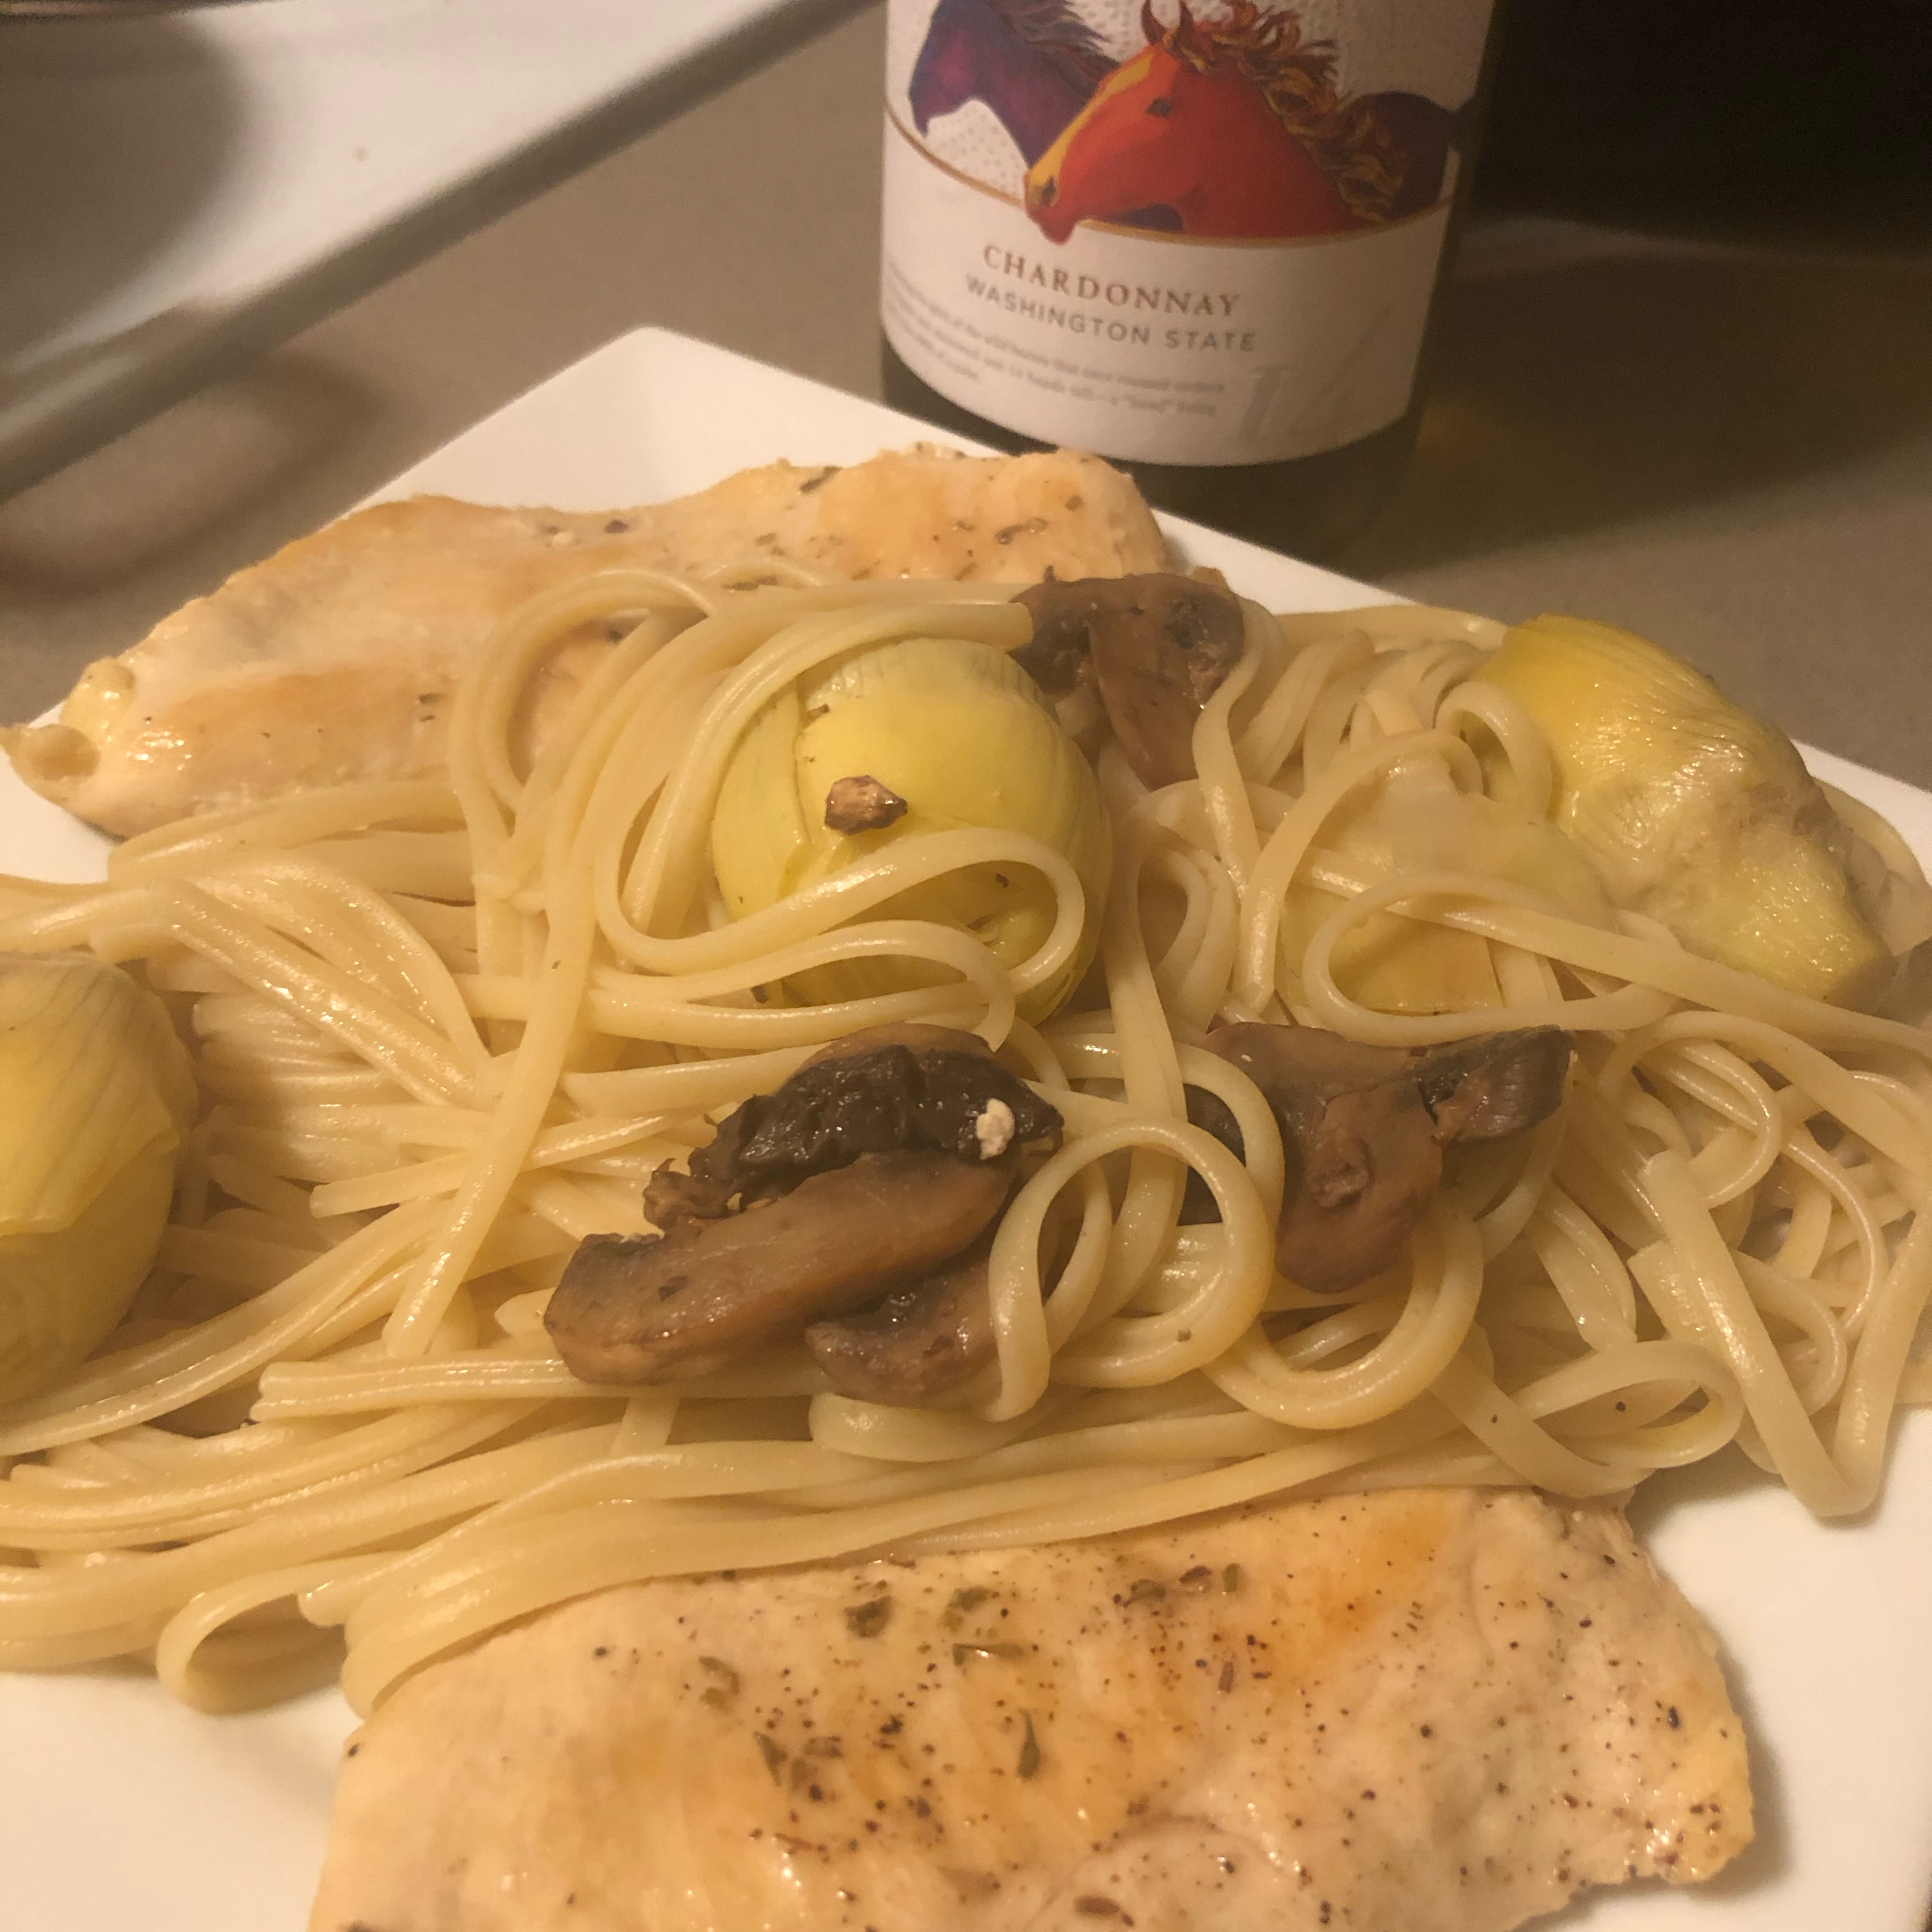 Romantic Chicken with Artichokes and Mushrooms 